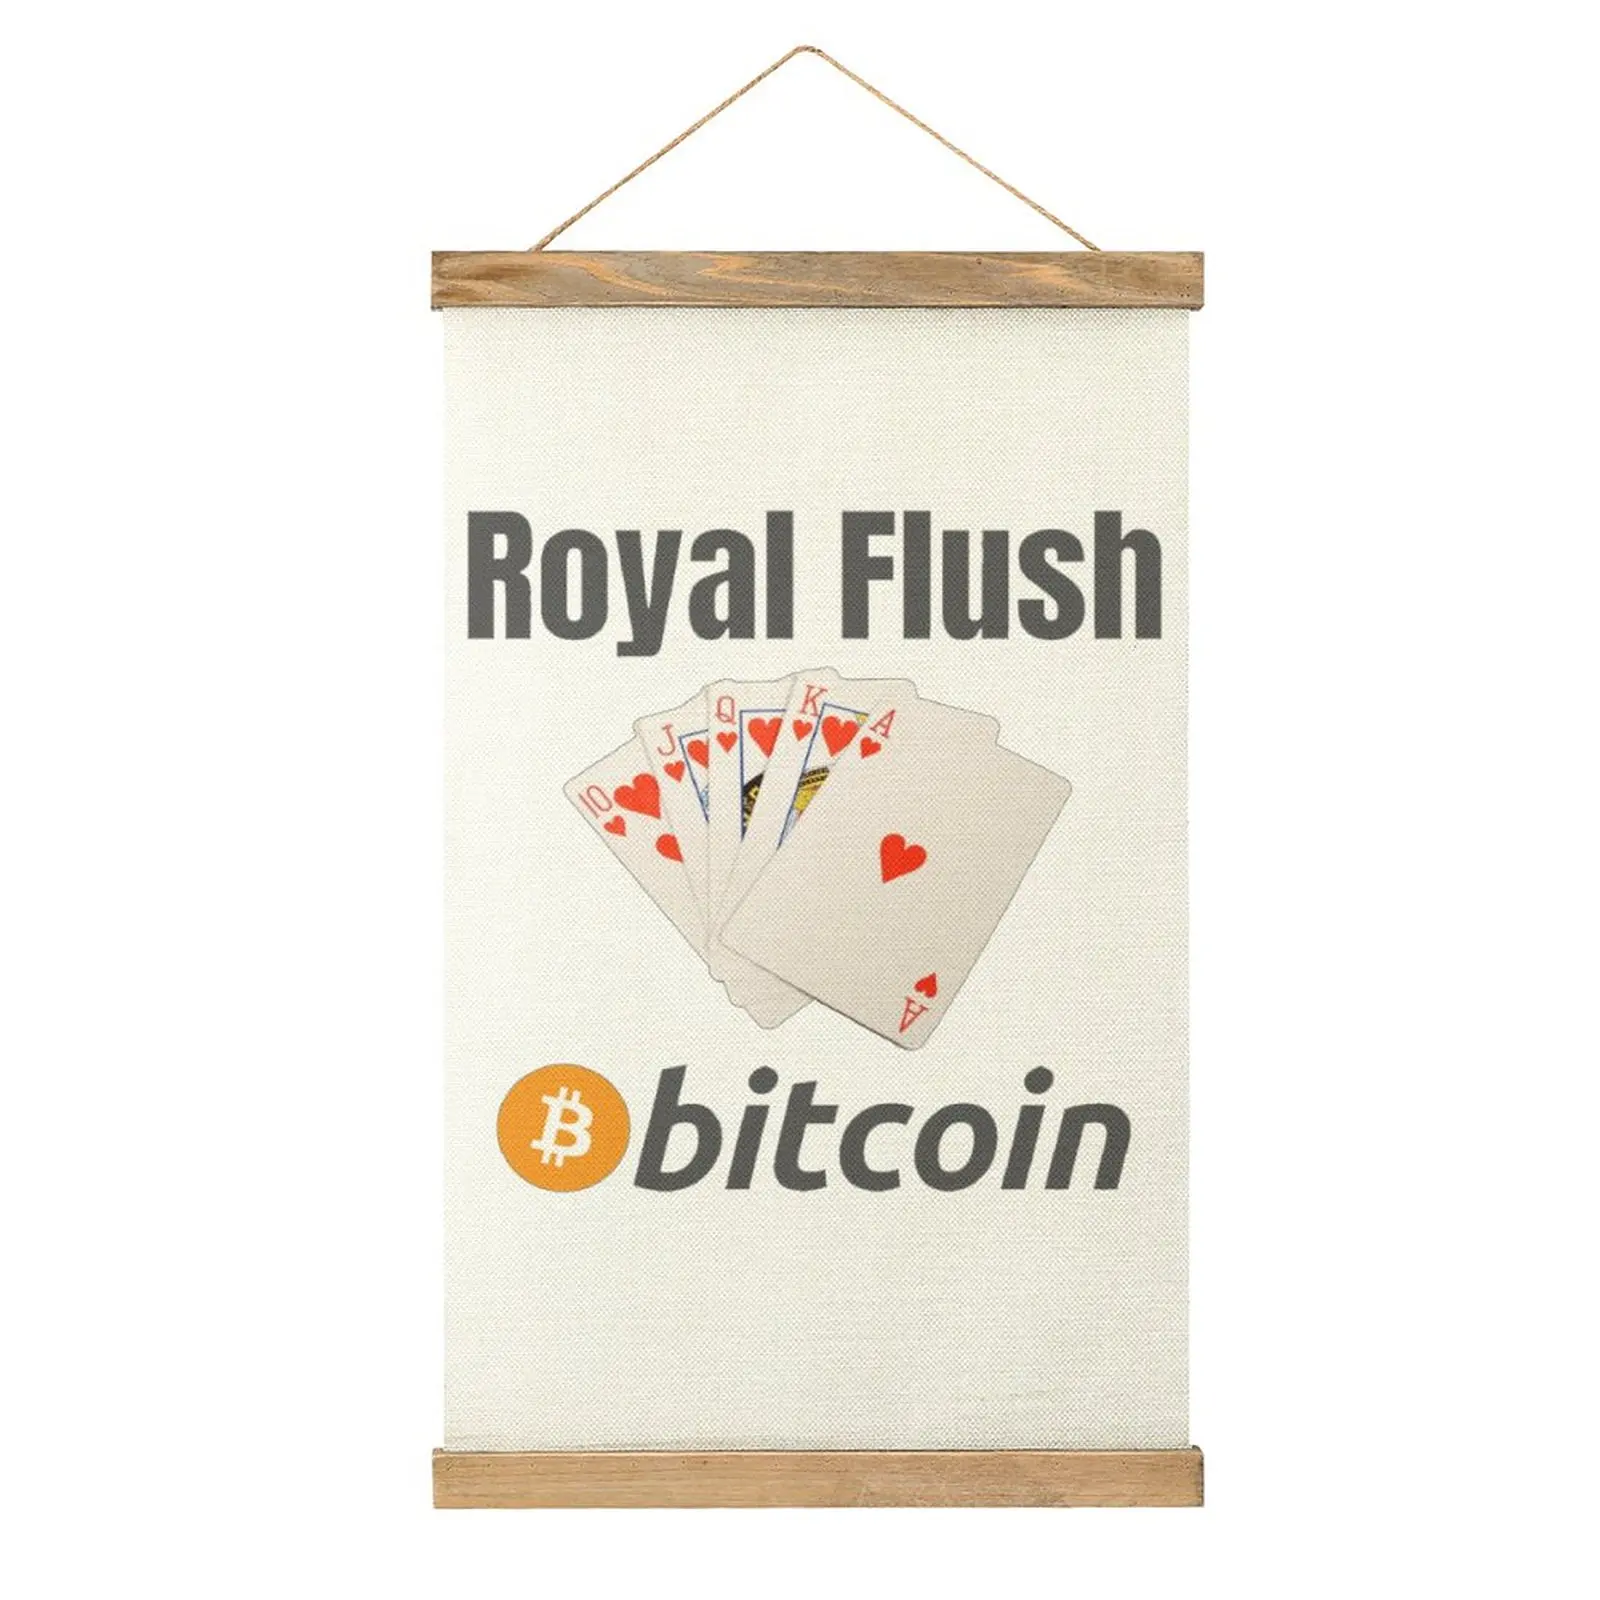 

Canvas Hanging Picture Royal Flush - Bitcoin Original Racerback Tank Top Quality Humor Graphic Painting Hotel Picture Hanging